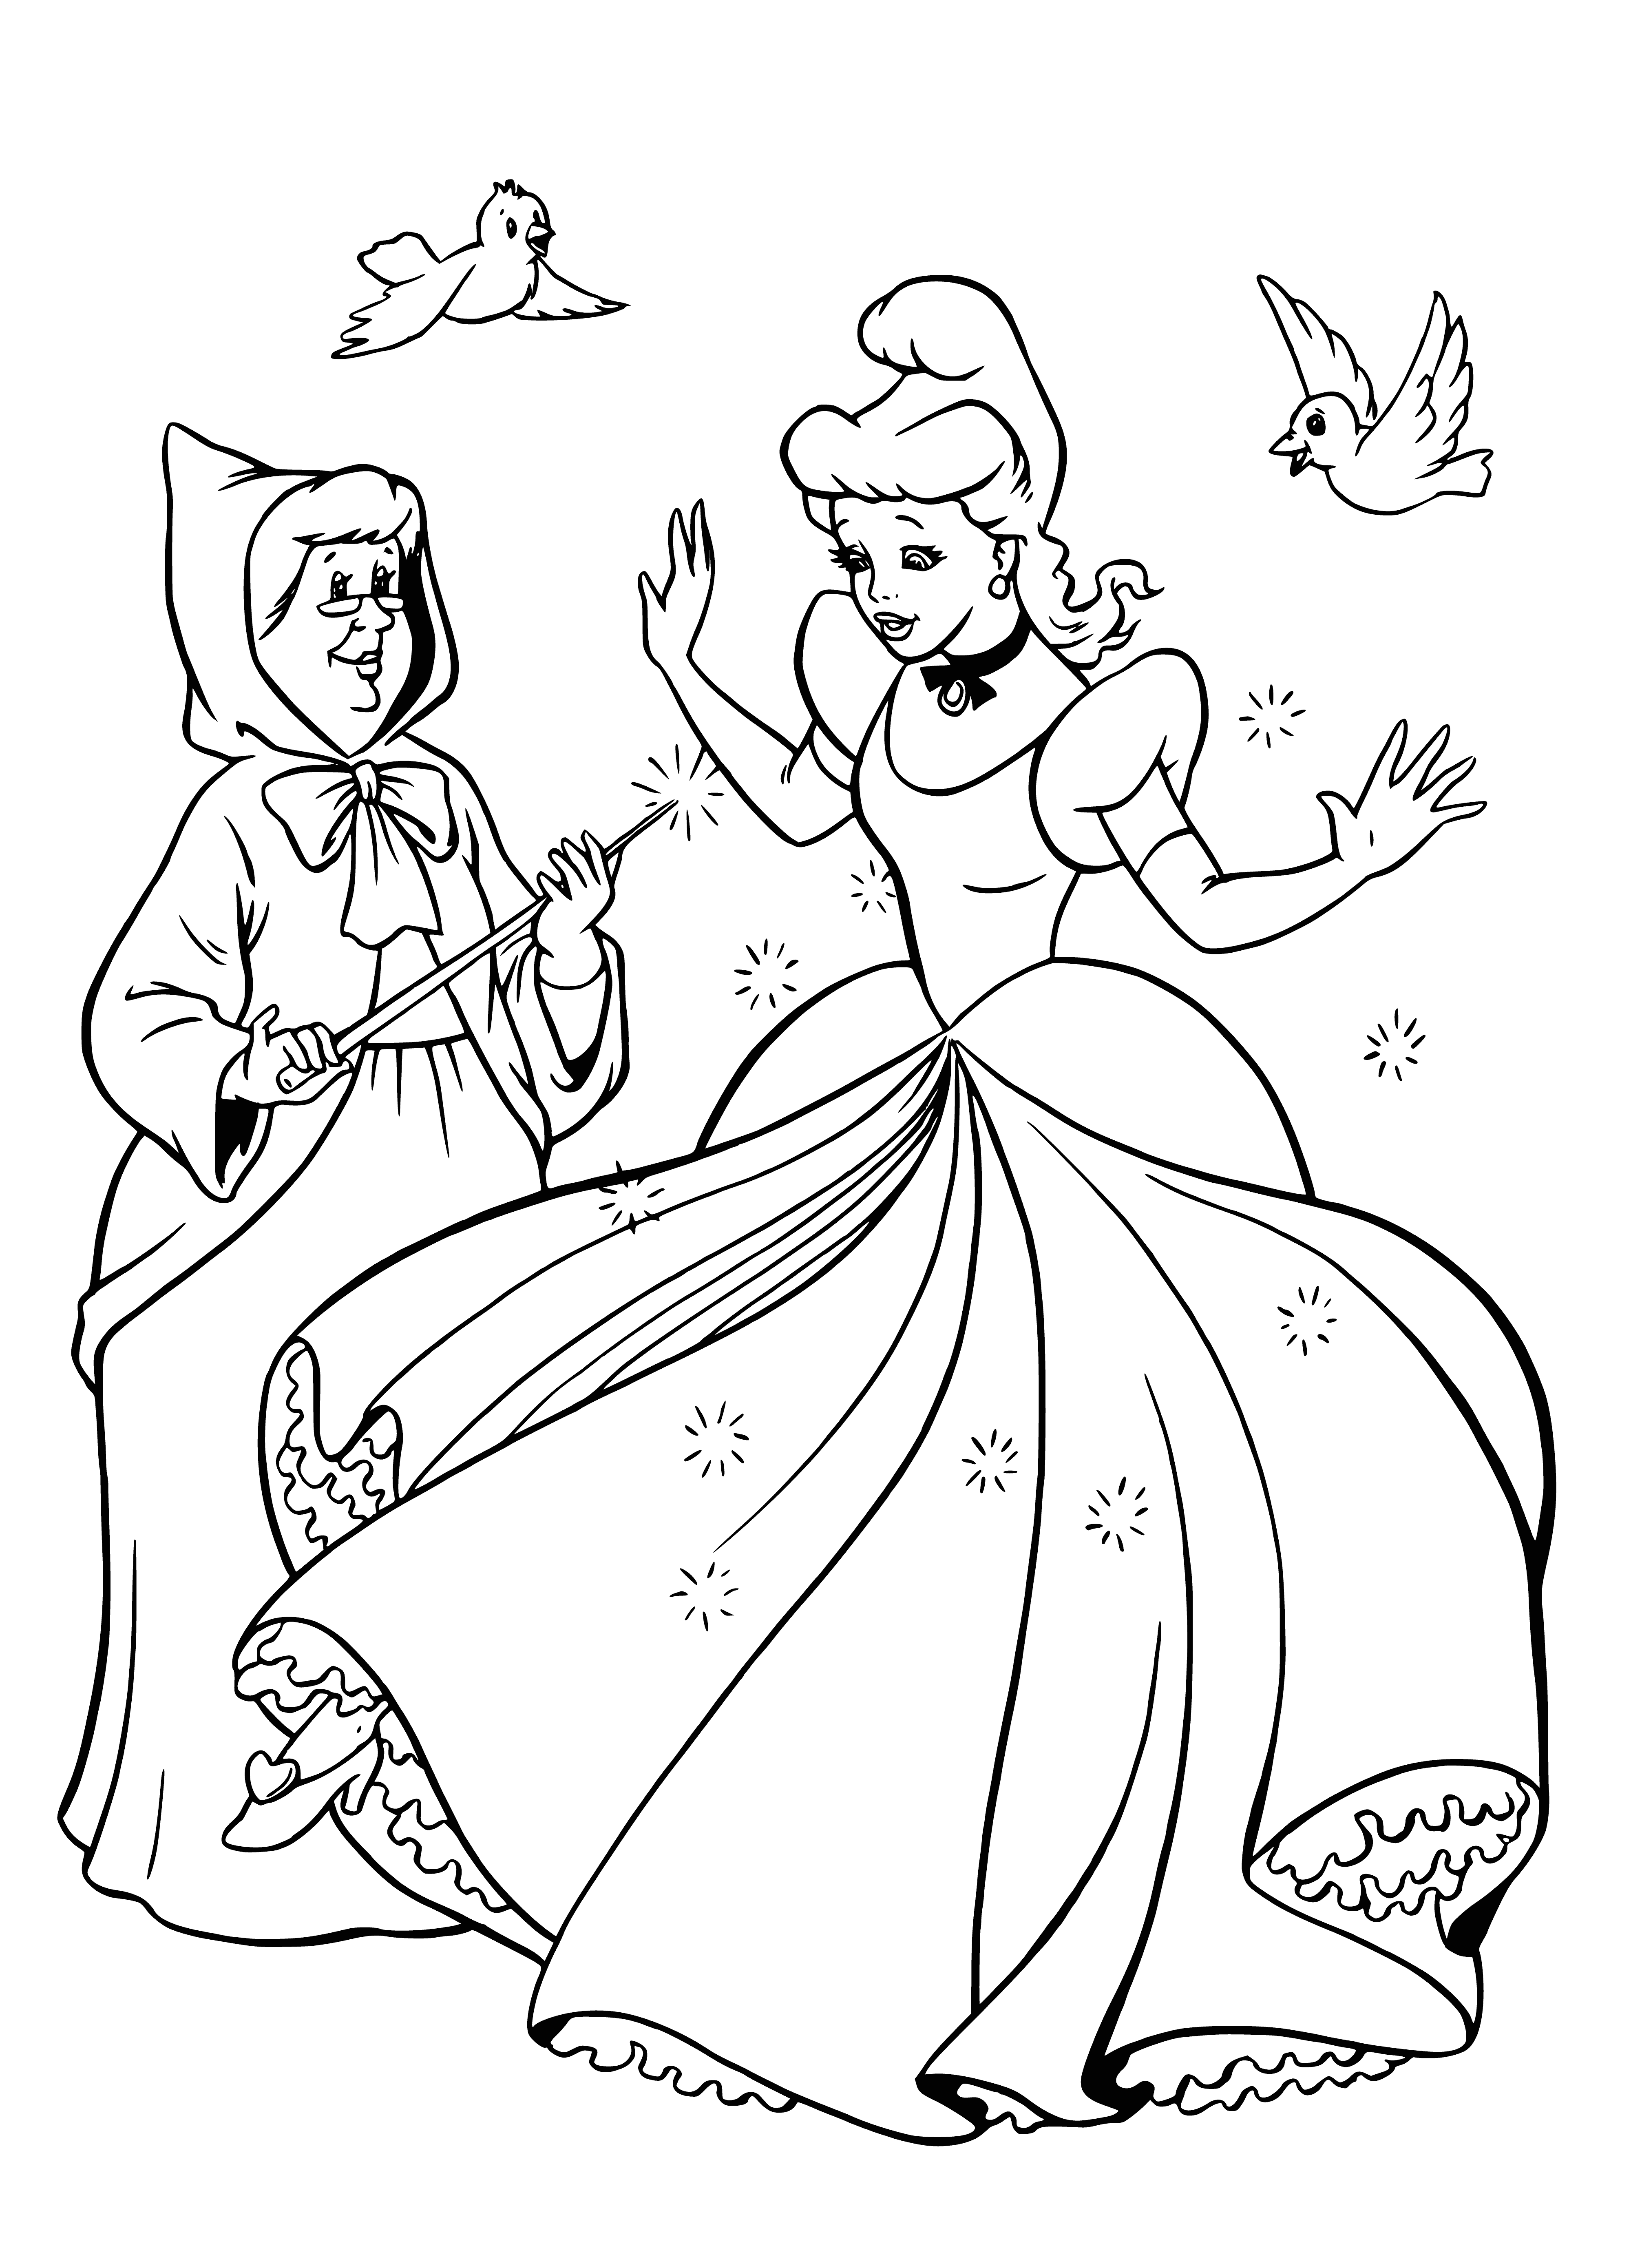 coloring page: Woman in w. dress w/ blue ribbon around waist, holding white rose & blue bow in hair. #Cinderella @Disney